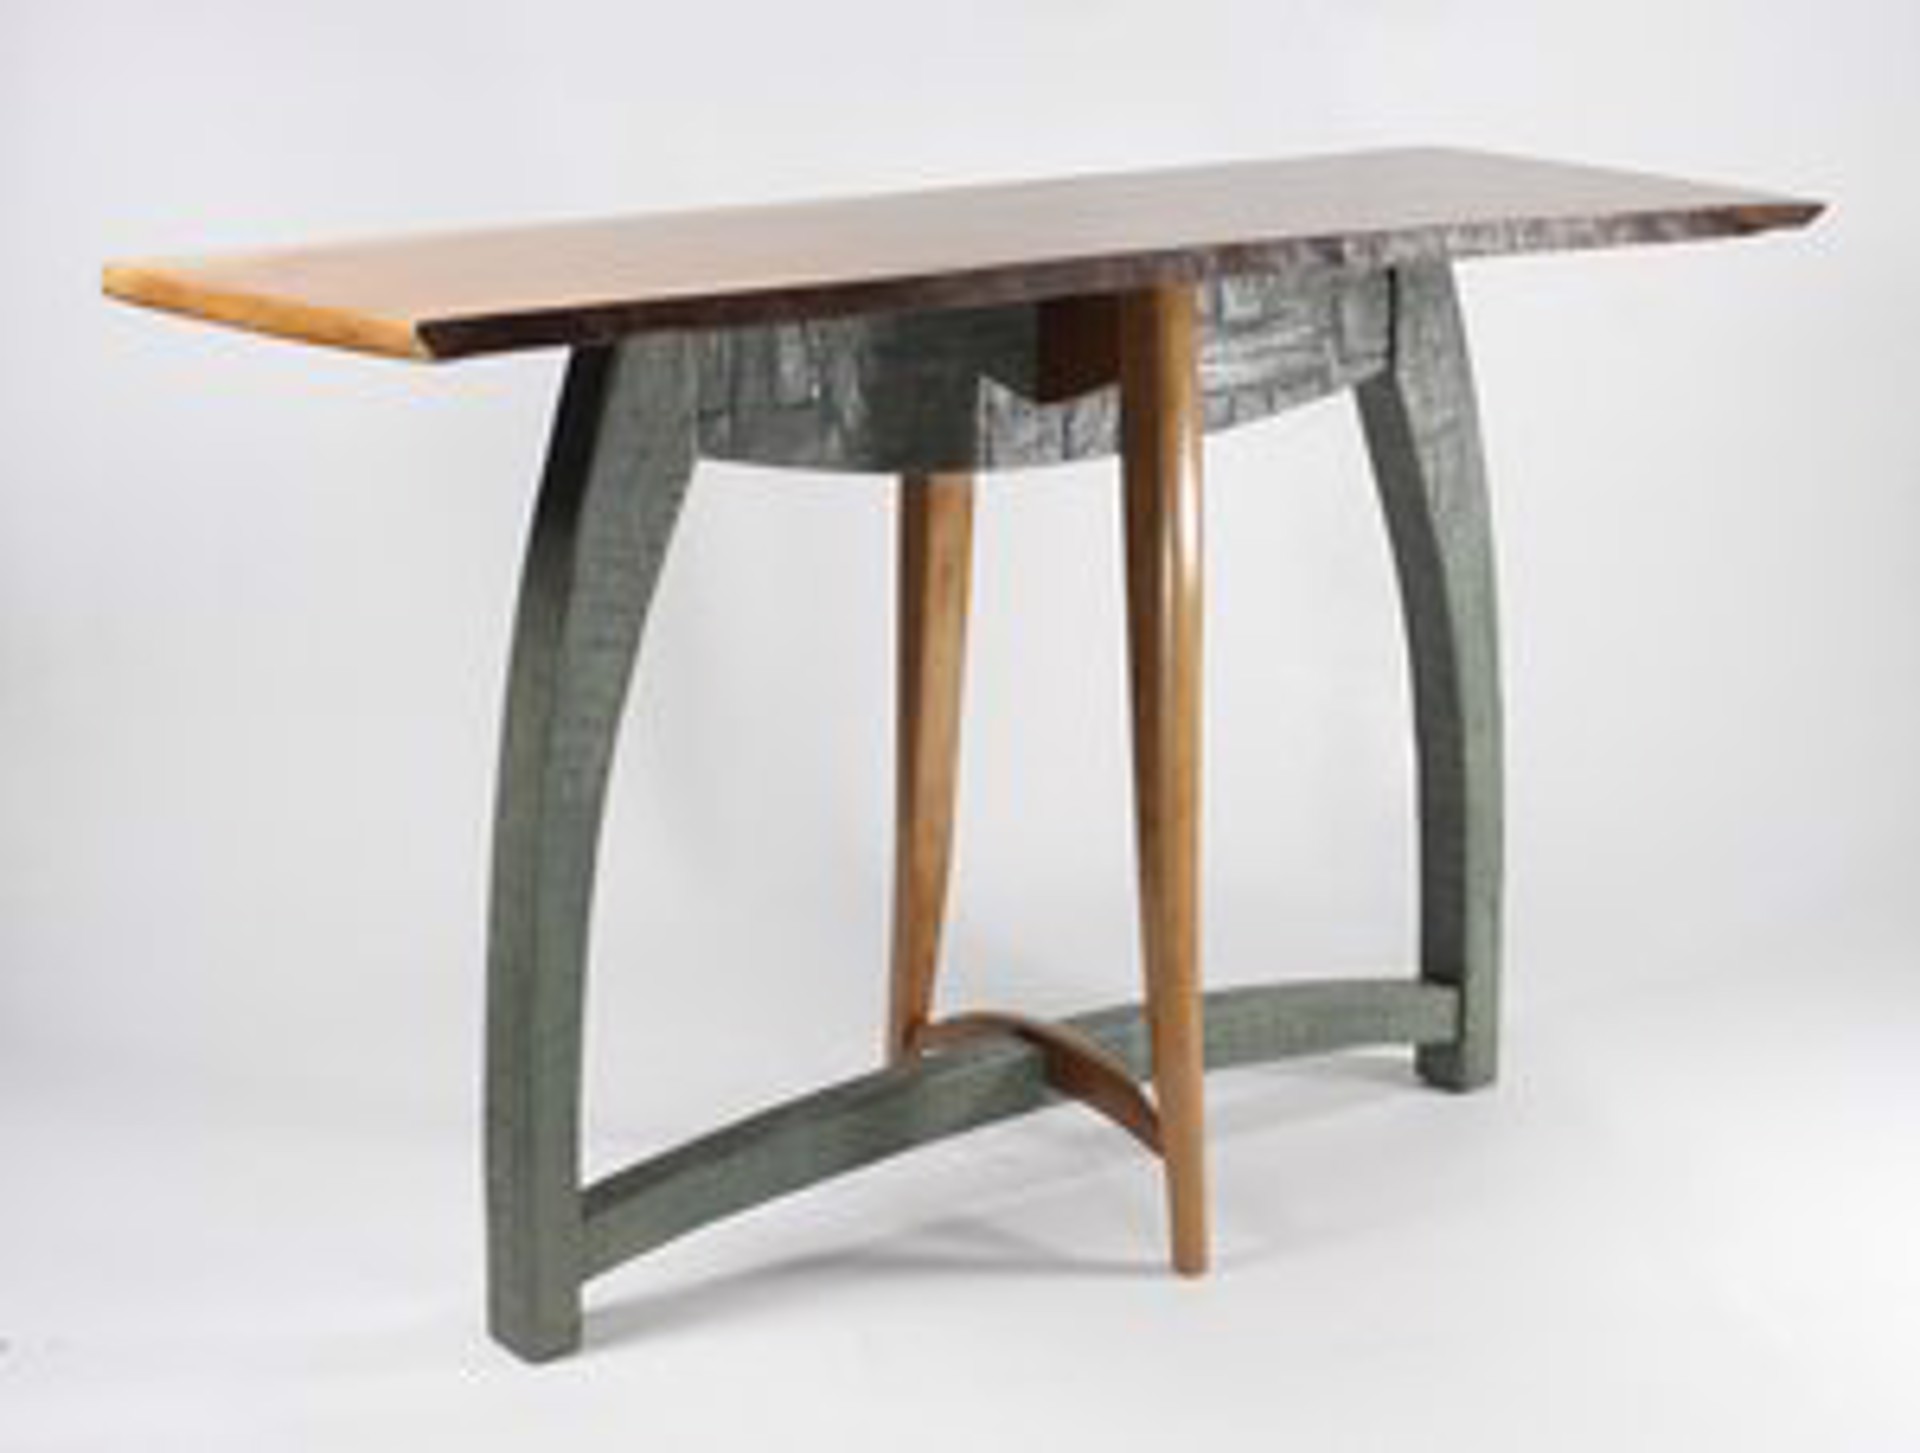 Live Edge Sofa Table #1 by Barry Newstat